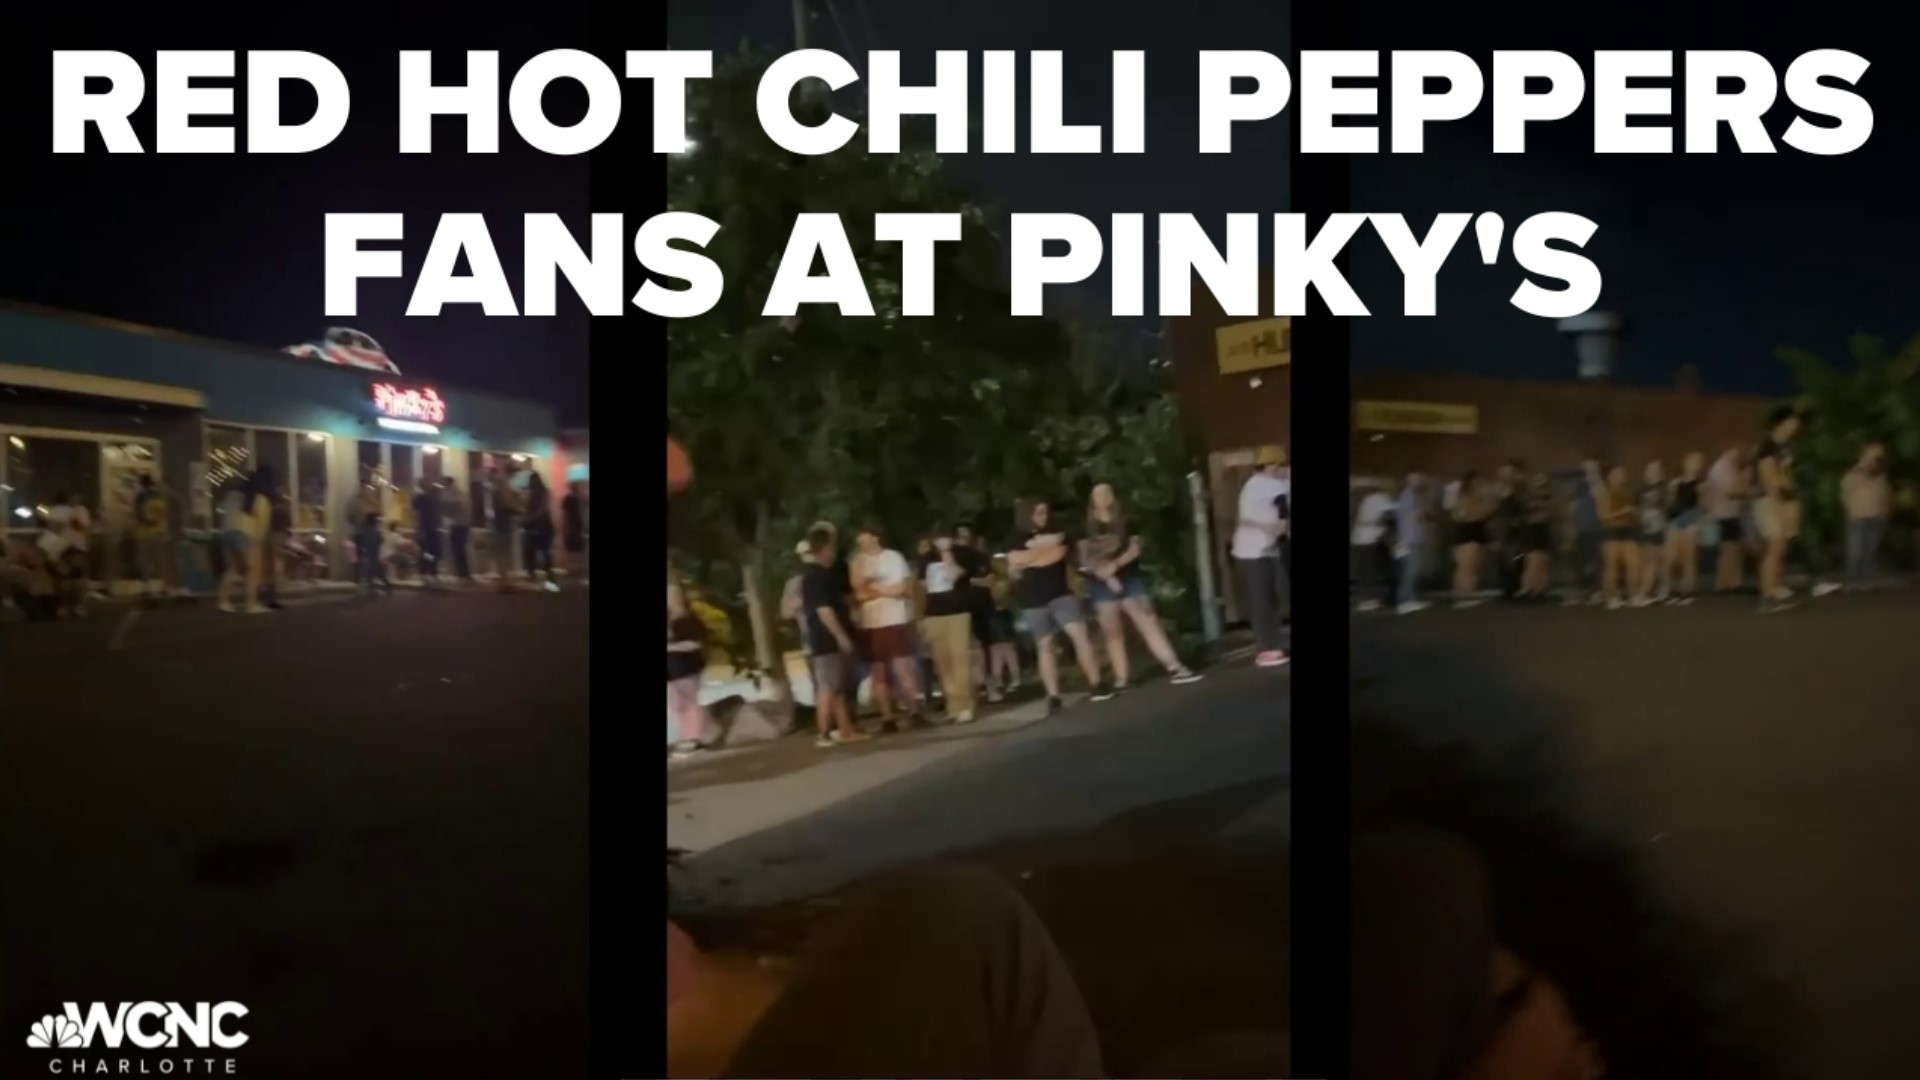 "Red Hot Chili Peppers called for an after party at Pinky's so like hundreds of people showed up and literally closed the place down," one Twitter post said.